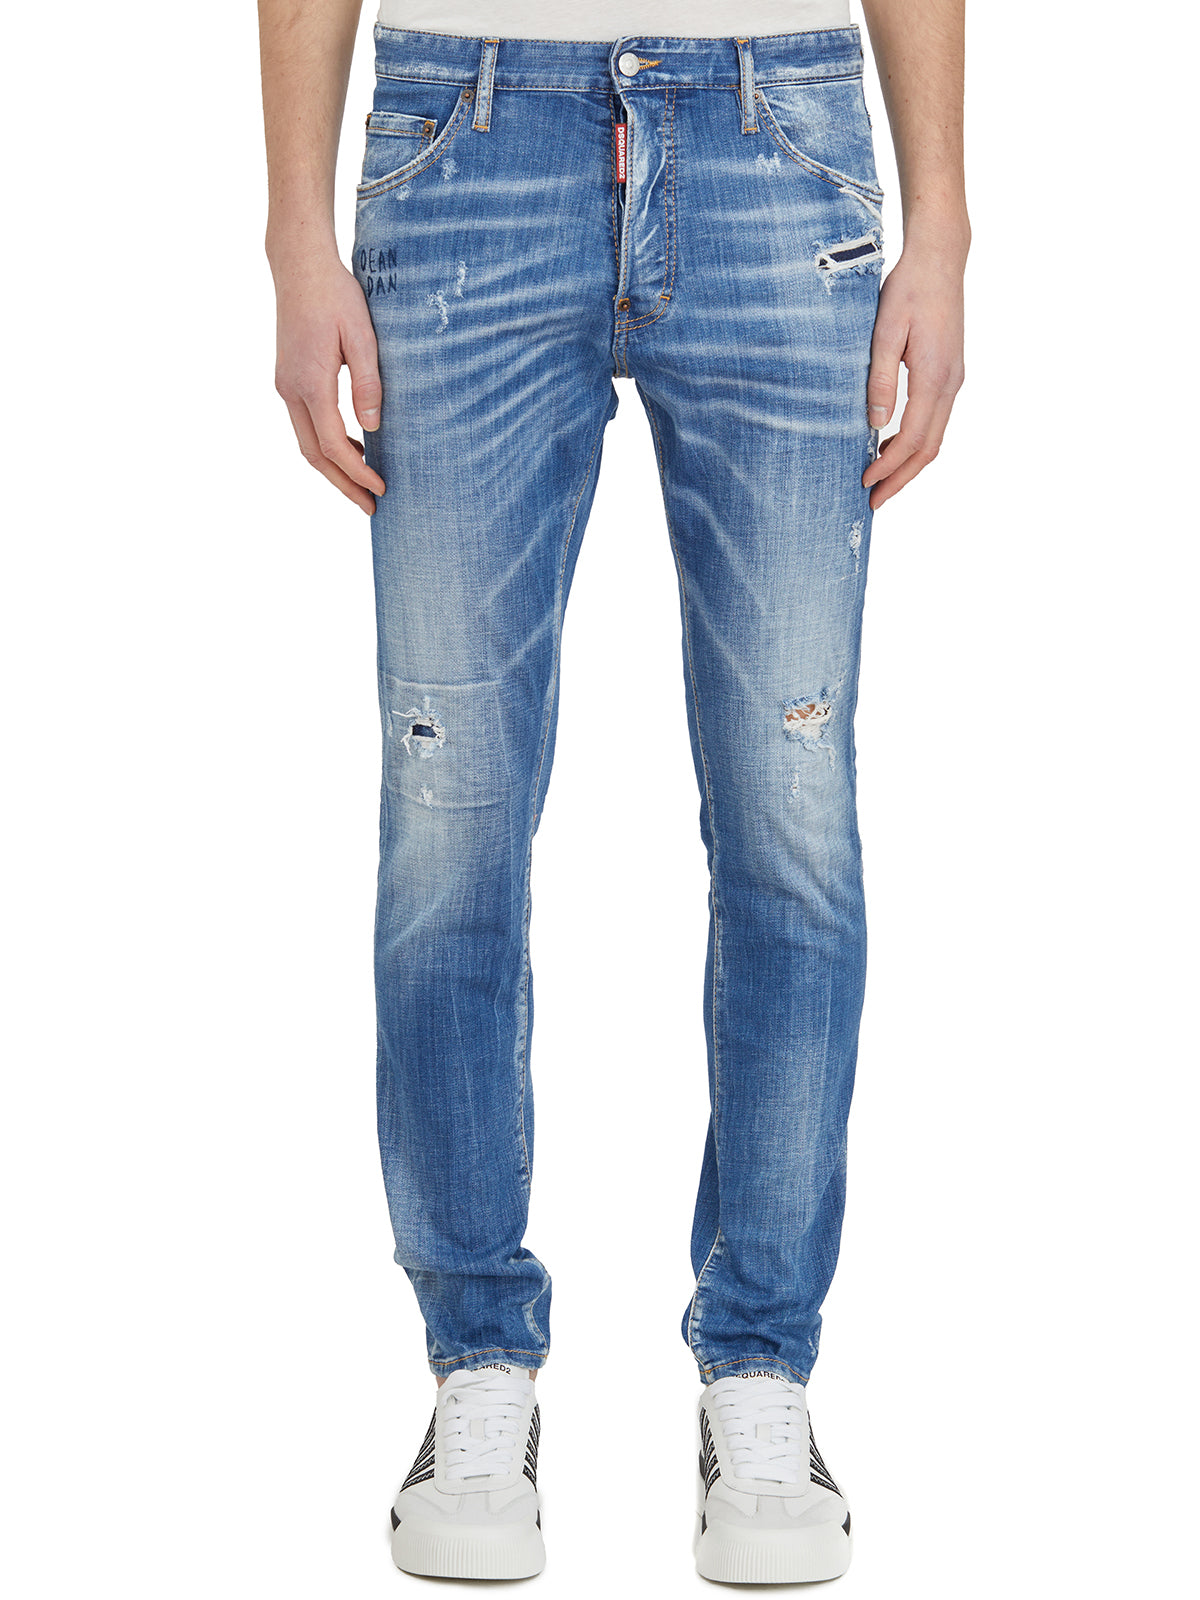 Cool Guy Jeans - SS24 Collection